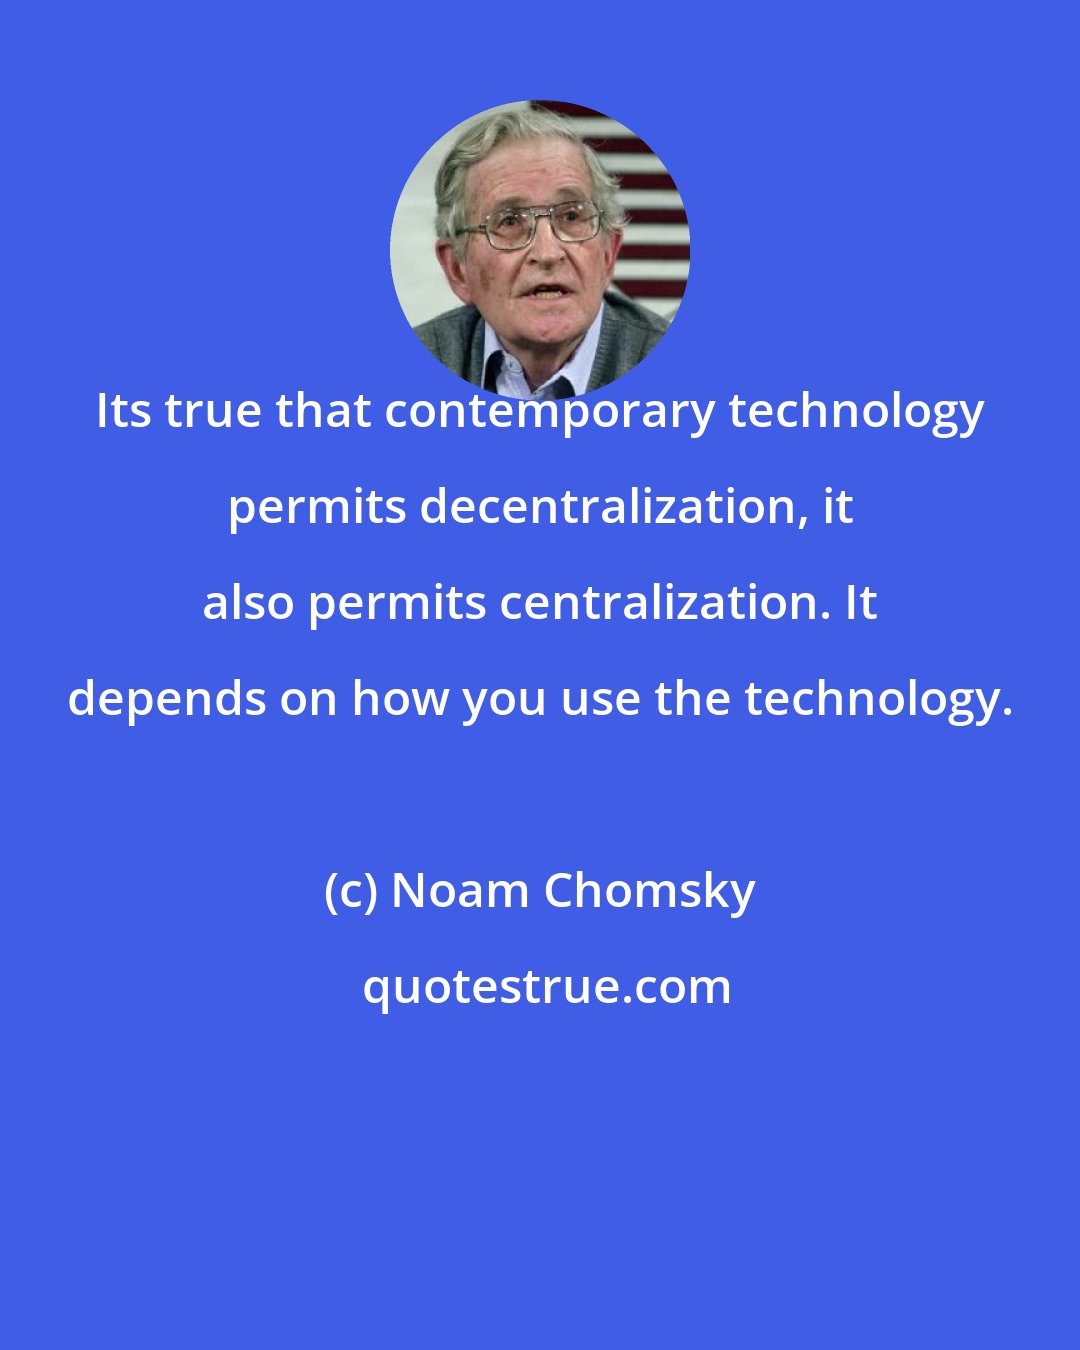 Noam Chomsky: Its true that contemporary technology permits decentralization, it also permits centralization. It depends on how you use the technology.